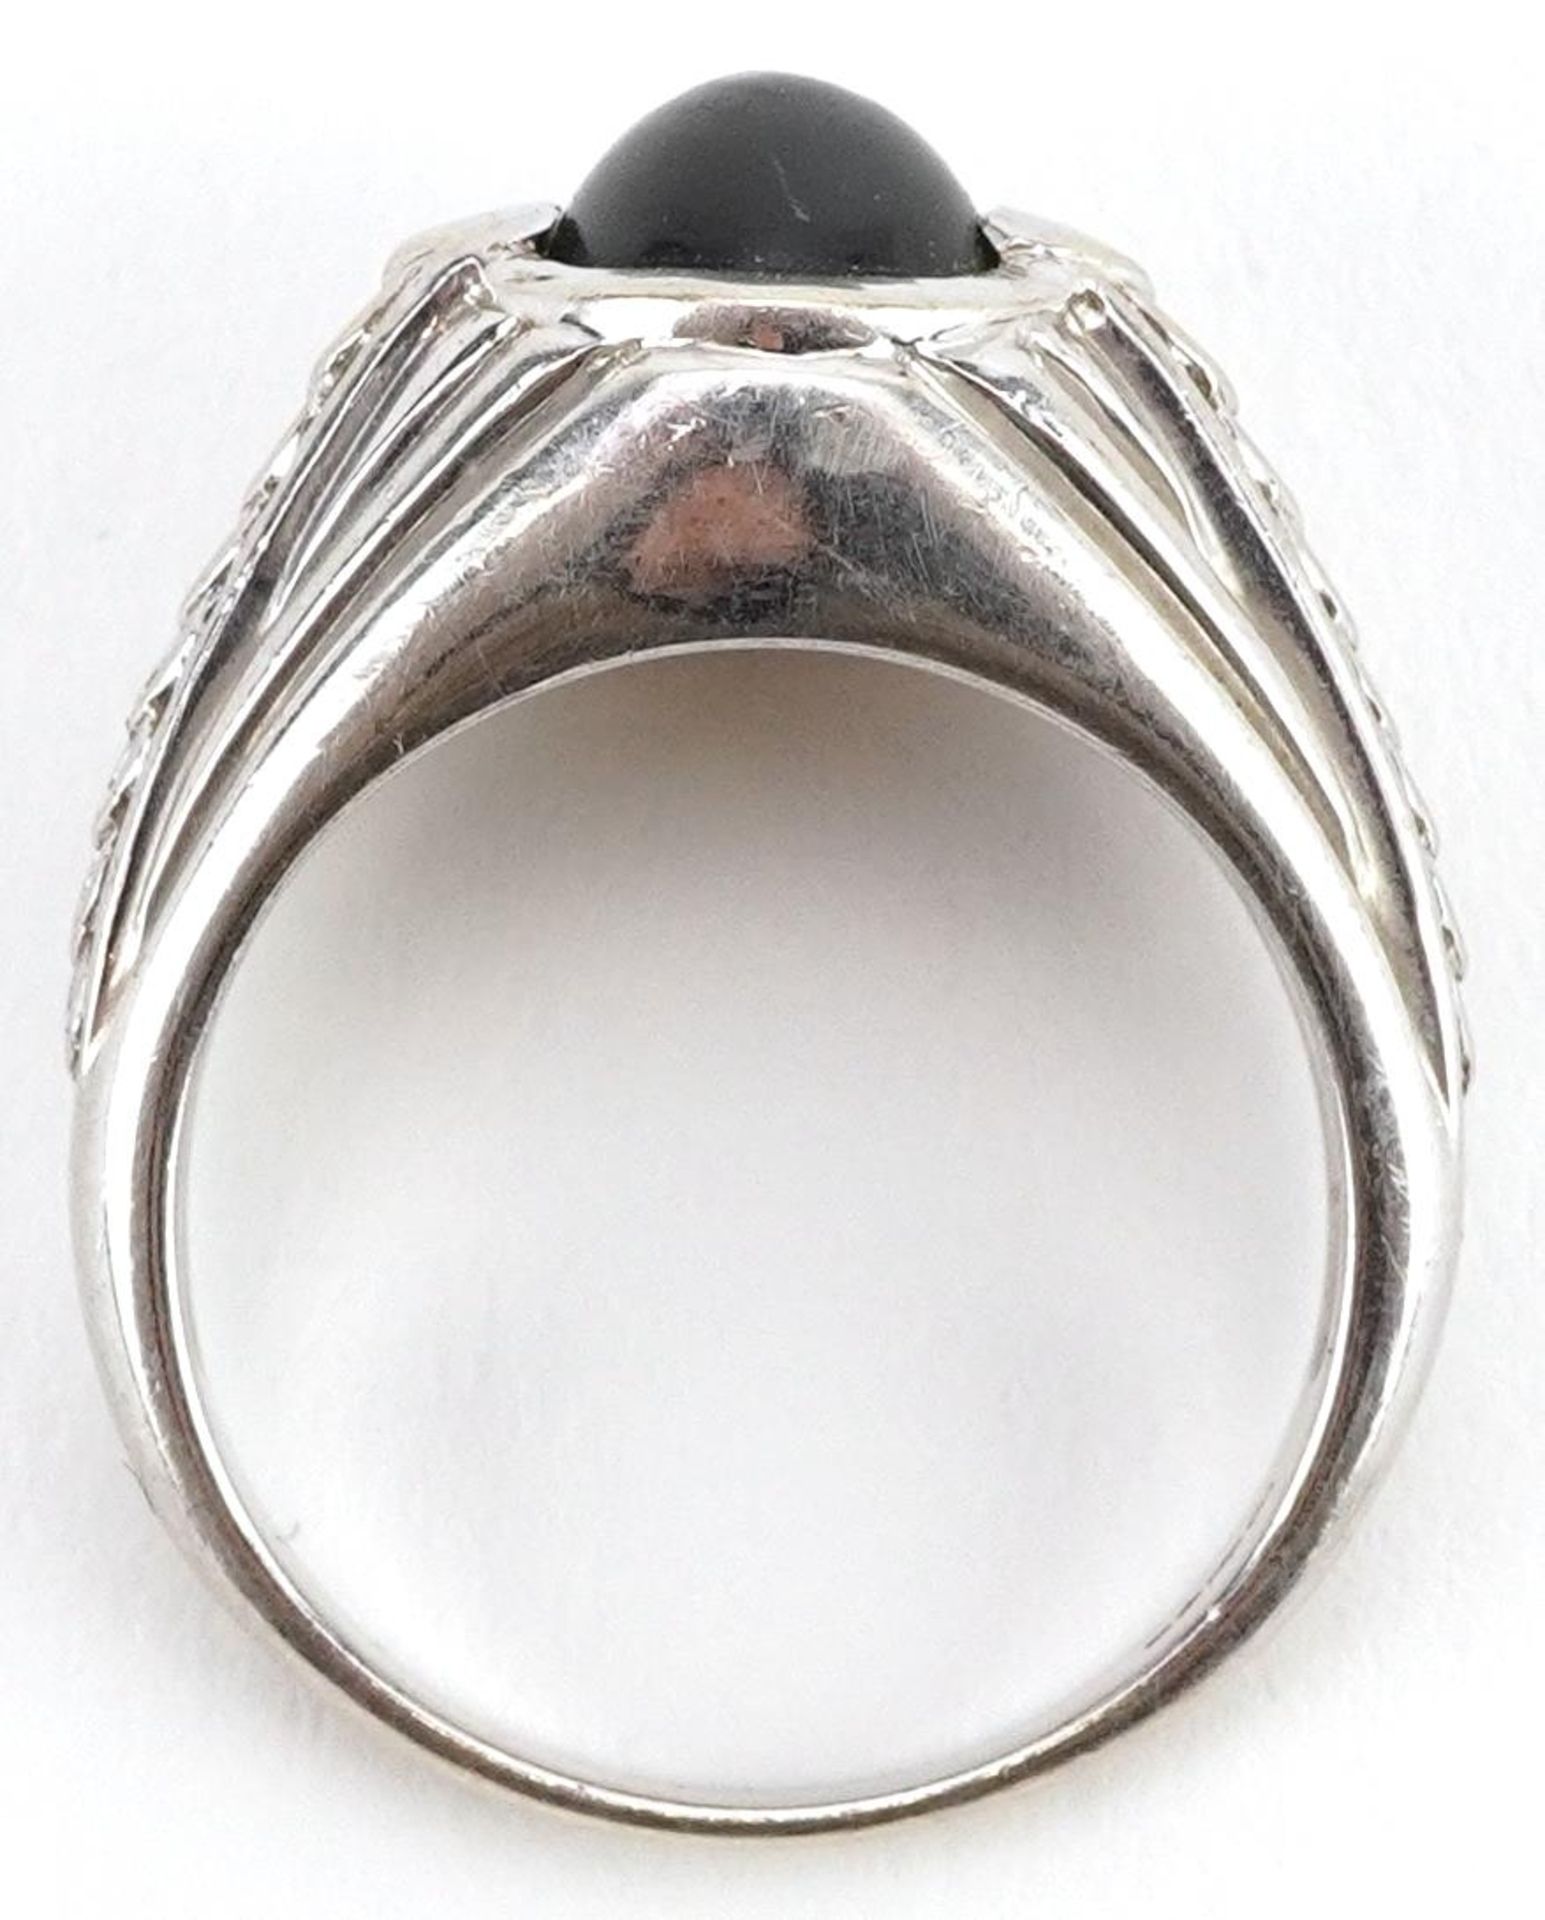 9ct white gold cabochon ring with pierced shoulders, possibly hematite, size T, 9.2g - Image 3 of 4